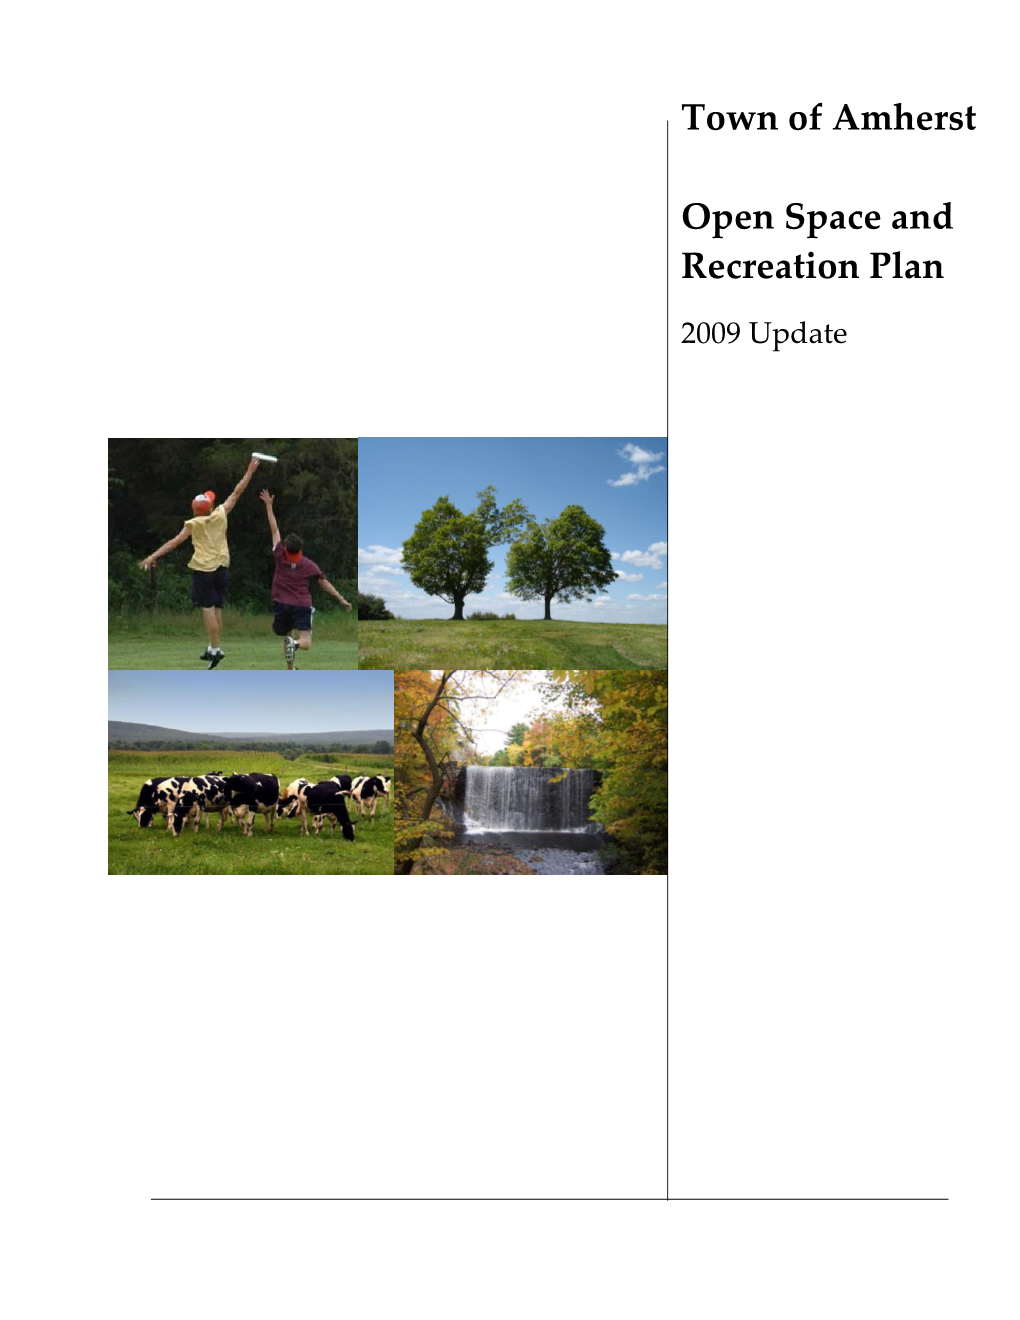 Town of Amherst Open Space and Recreation Plan